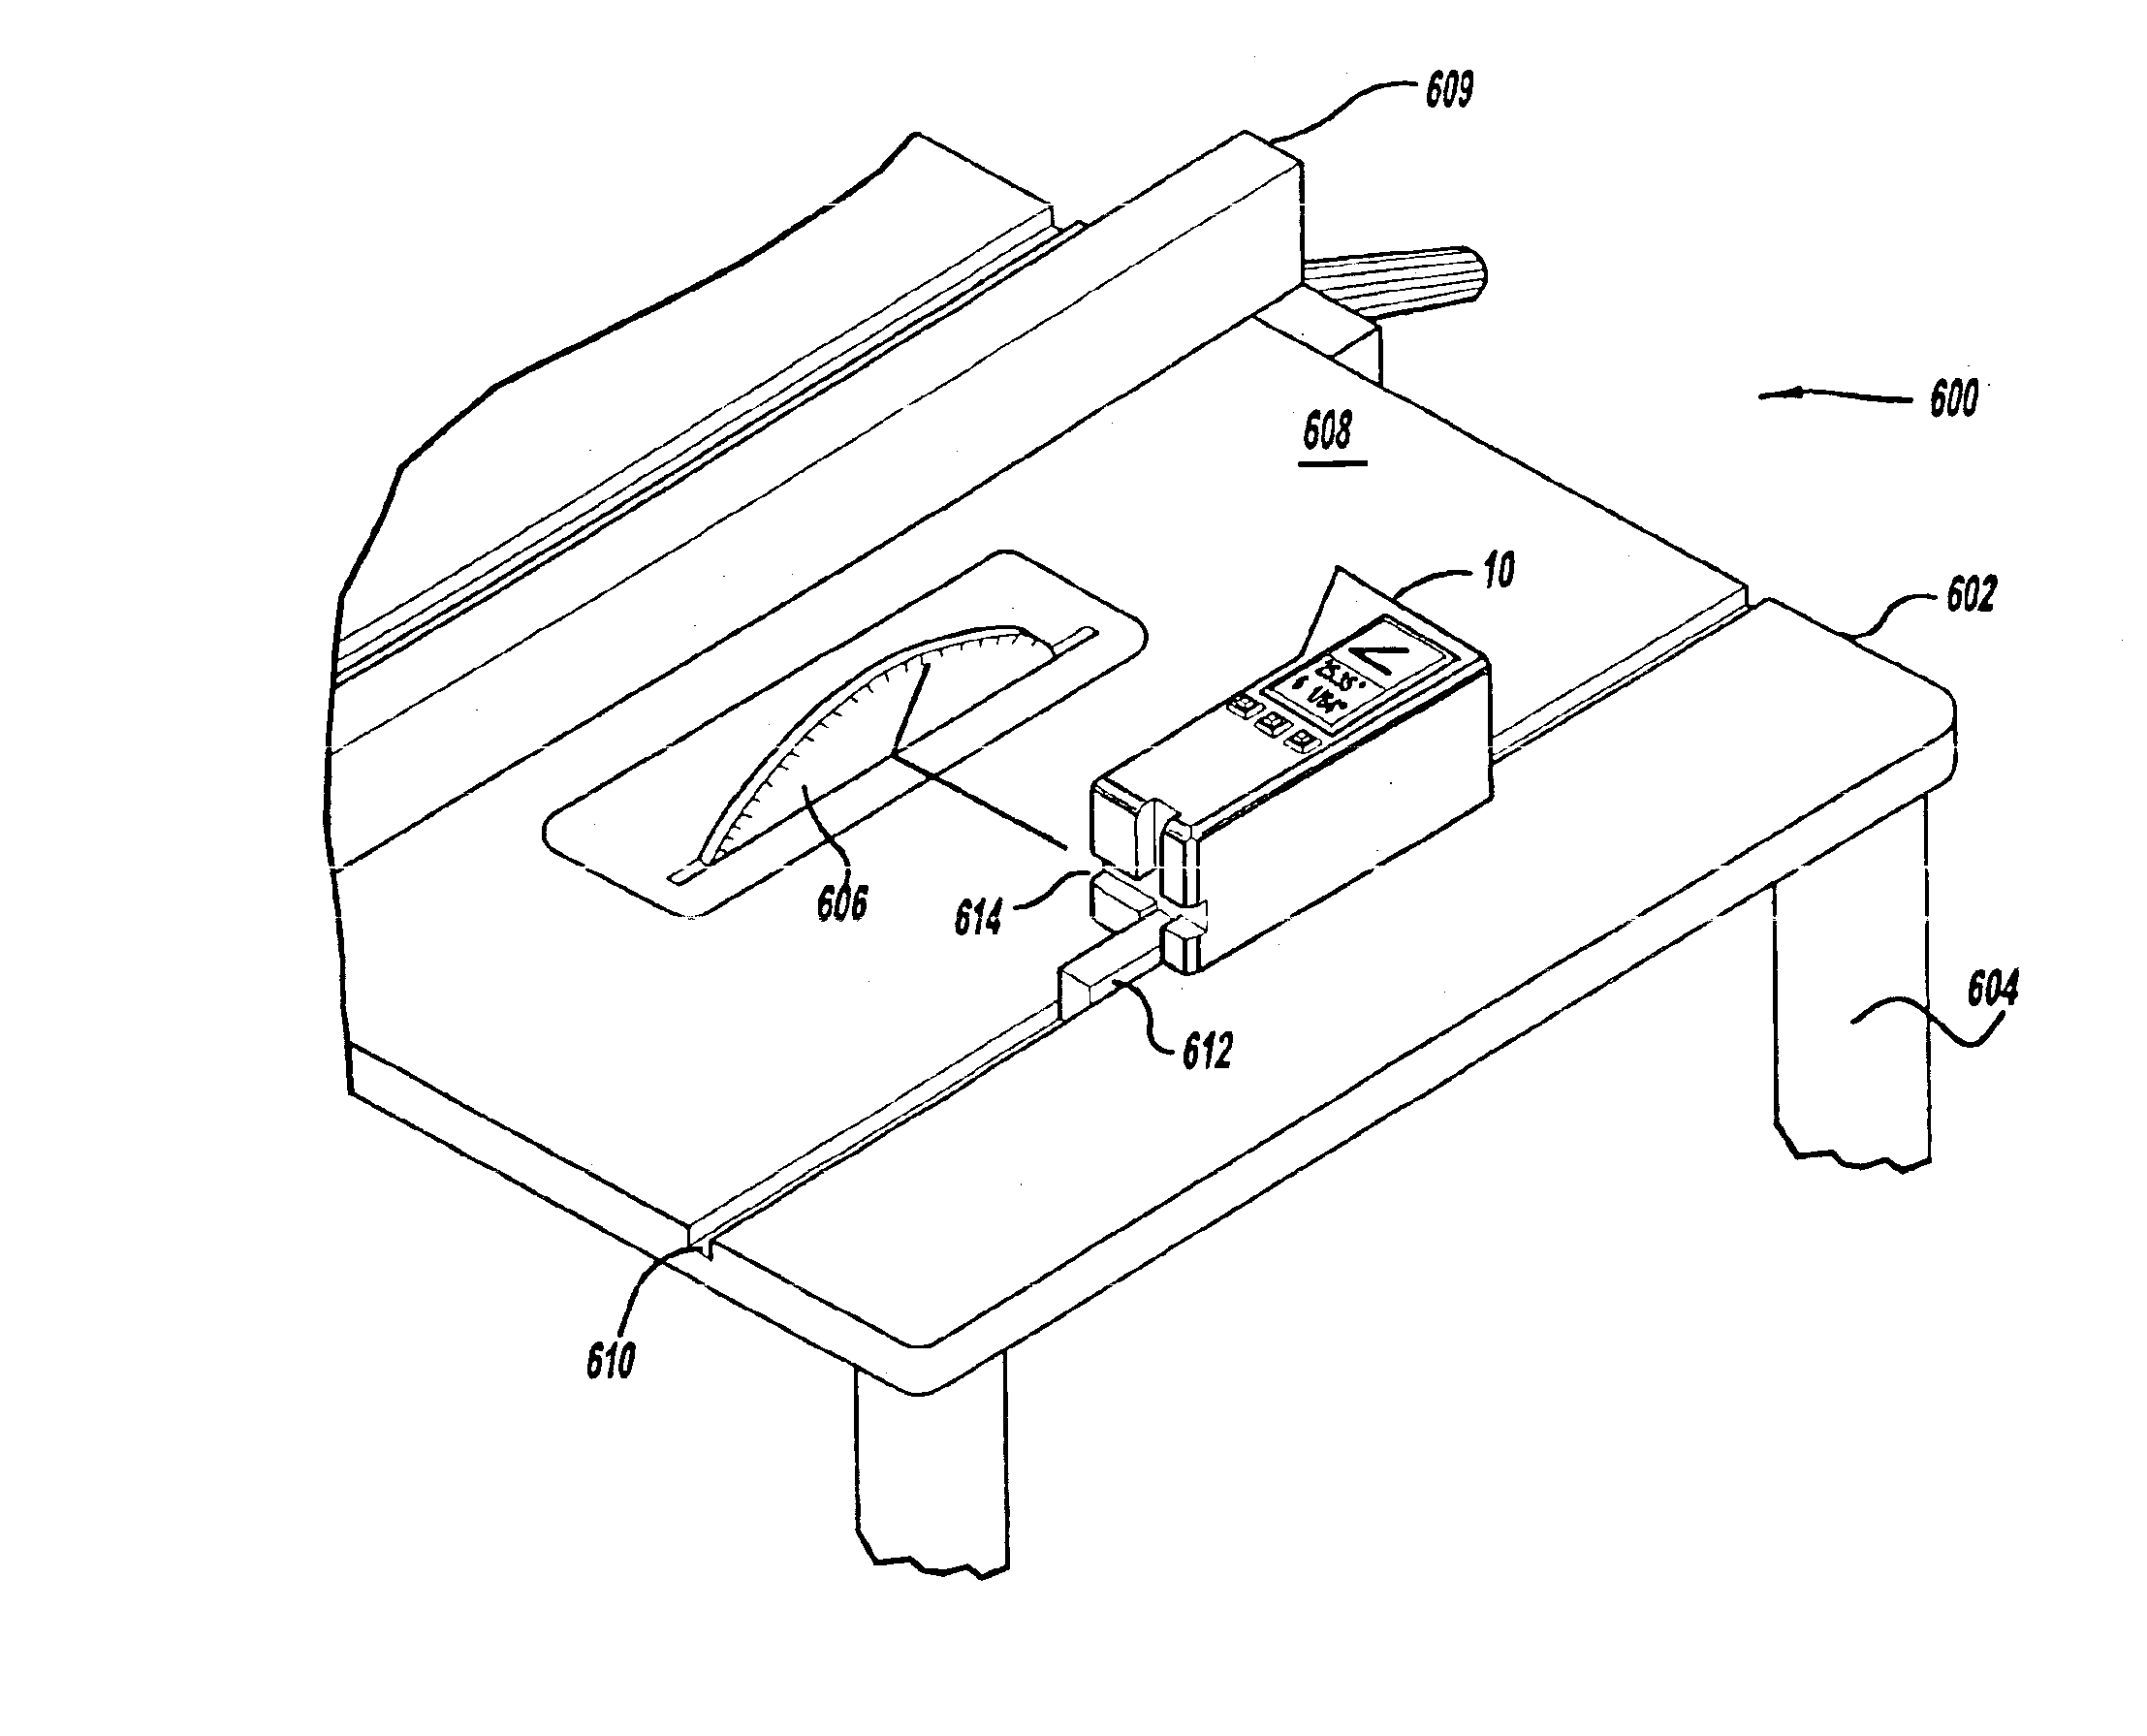 Non-contact measurement device for quickly and accurately obtaining dimensional measurement data